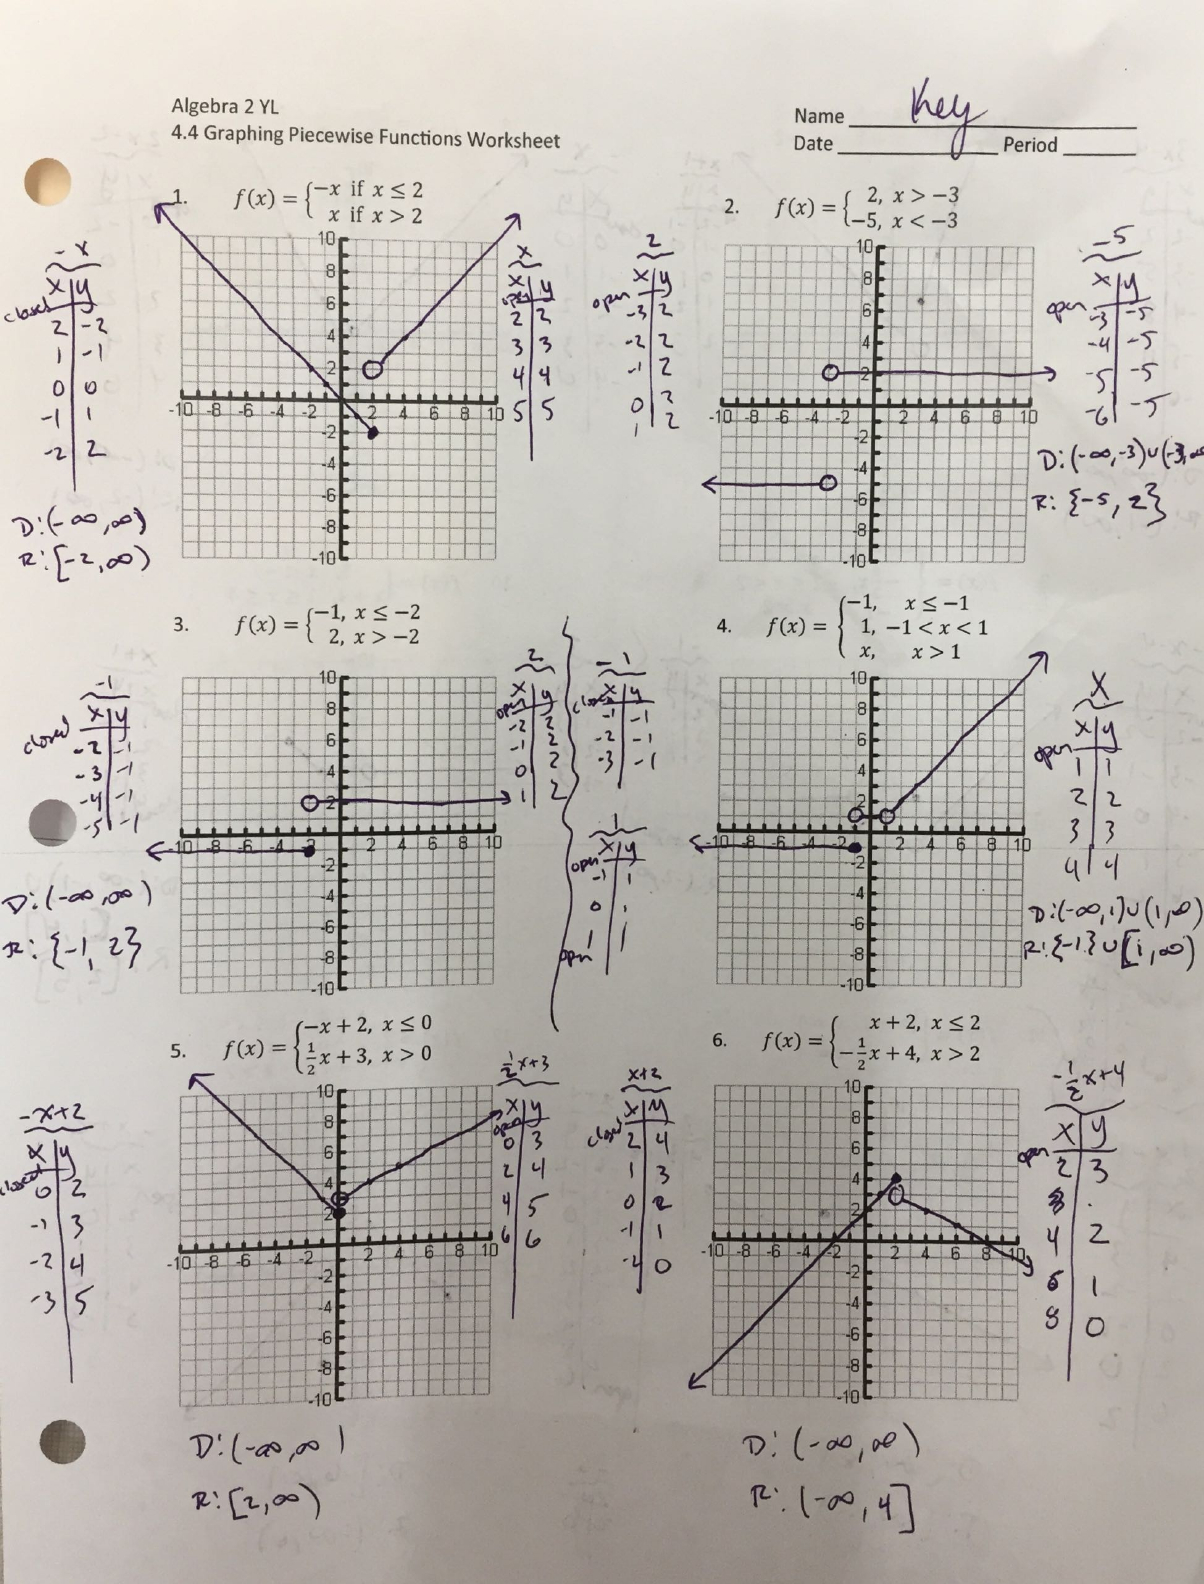 algebra-2-yl-44-graphing-piecewise-functions-2-yl-44-graphing-db-excel